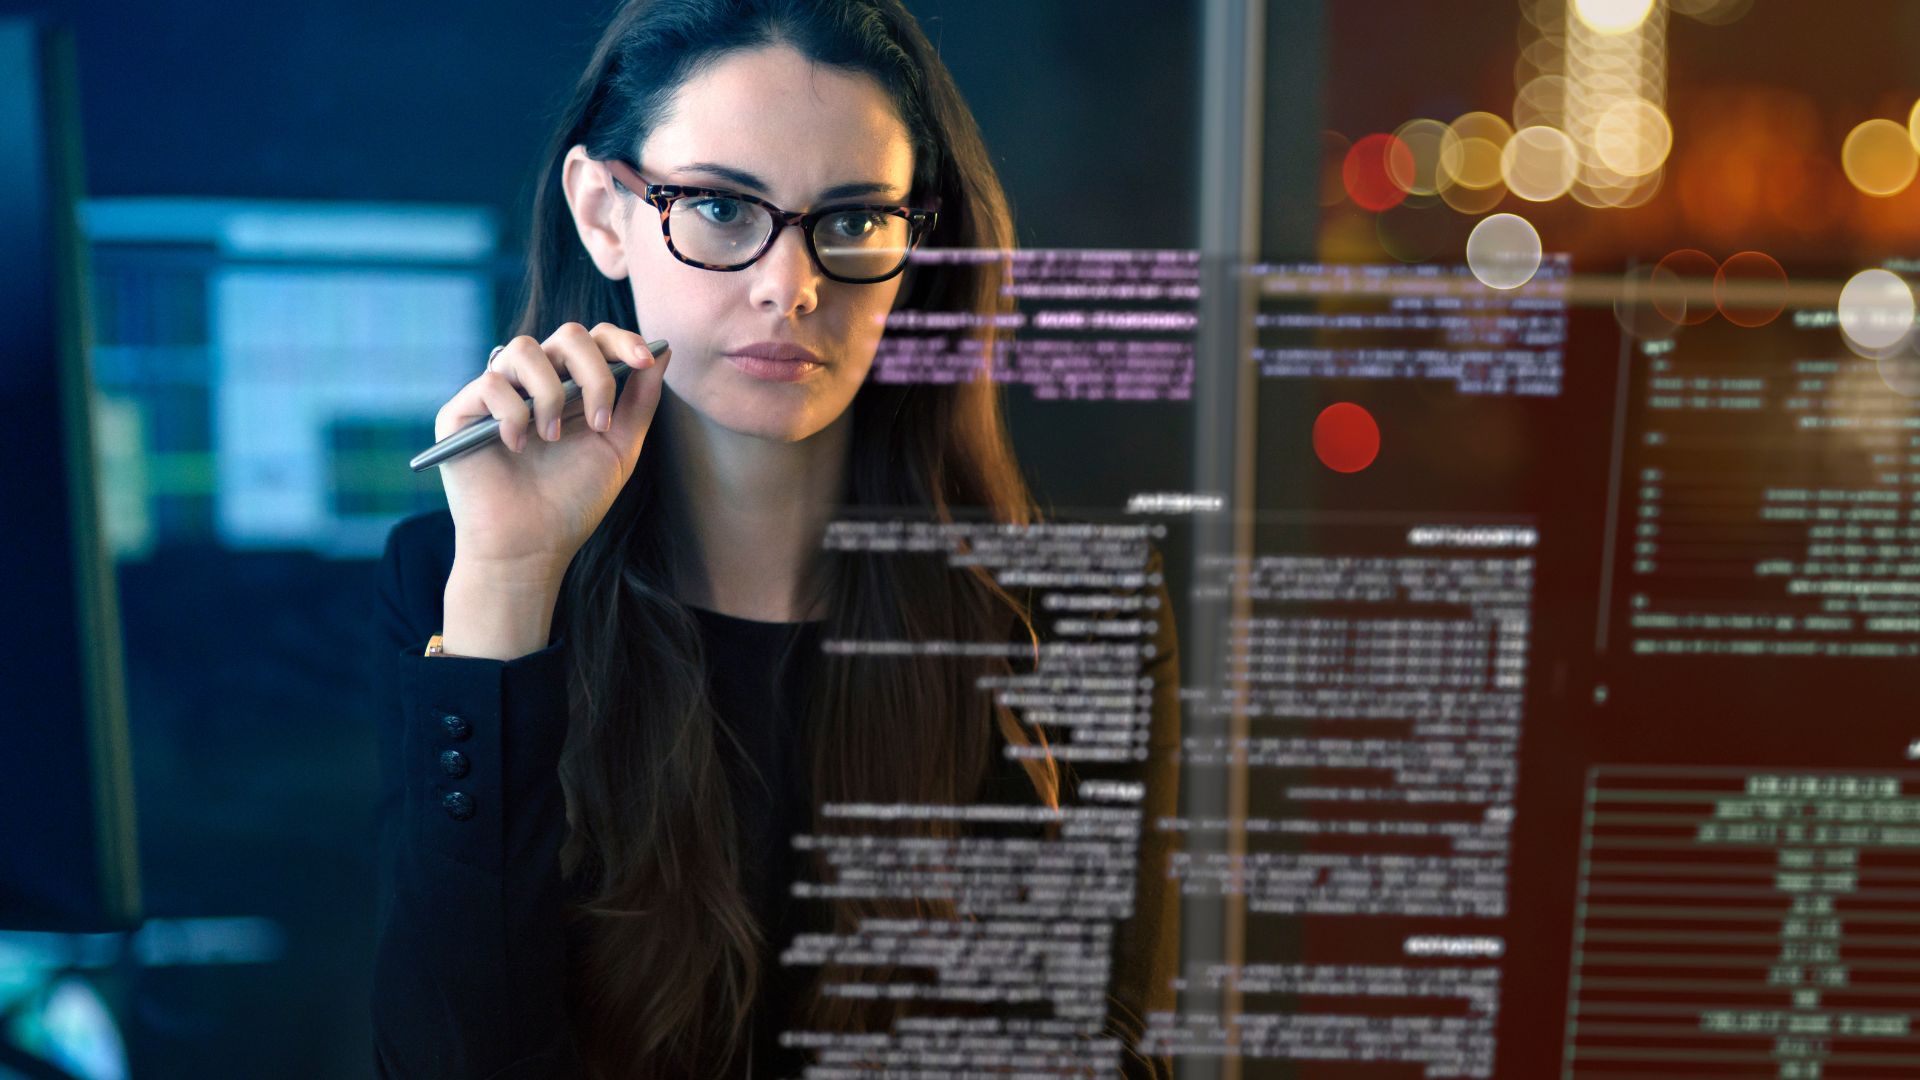 business woman looking at glass screen with computer data and text displayed on it